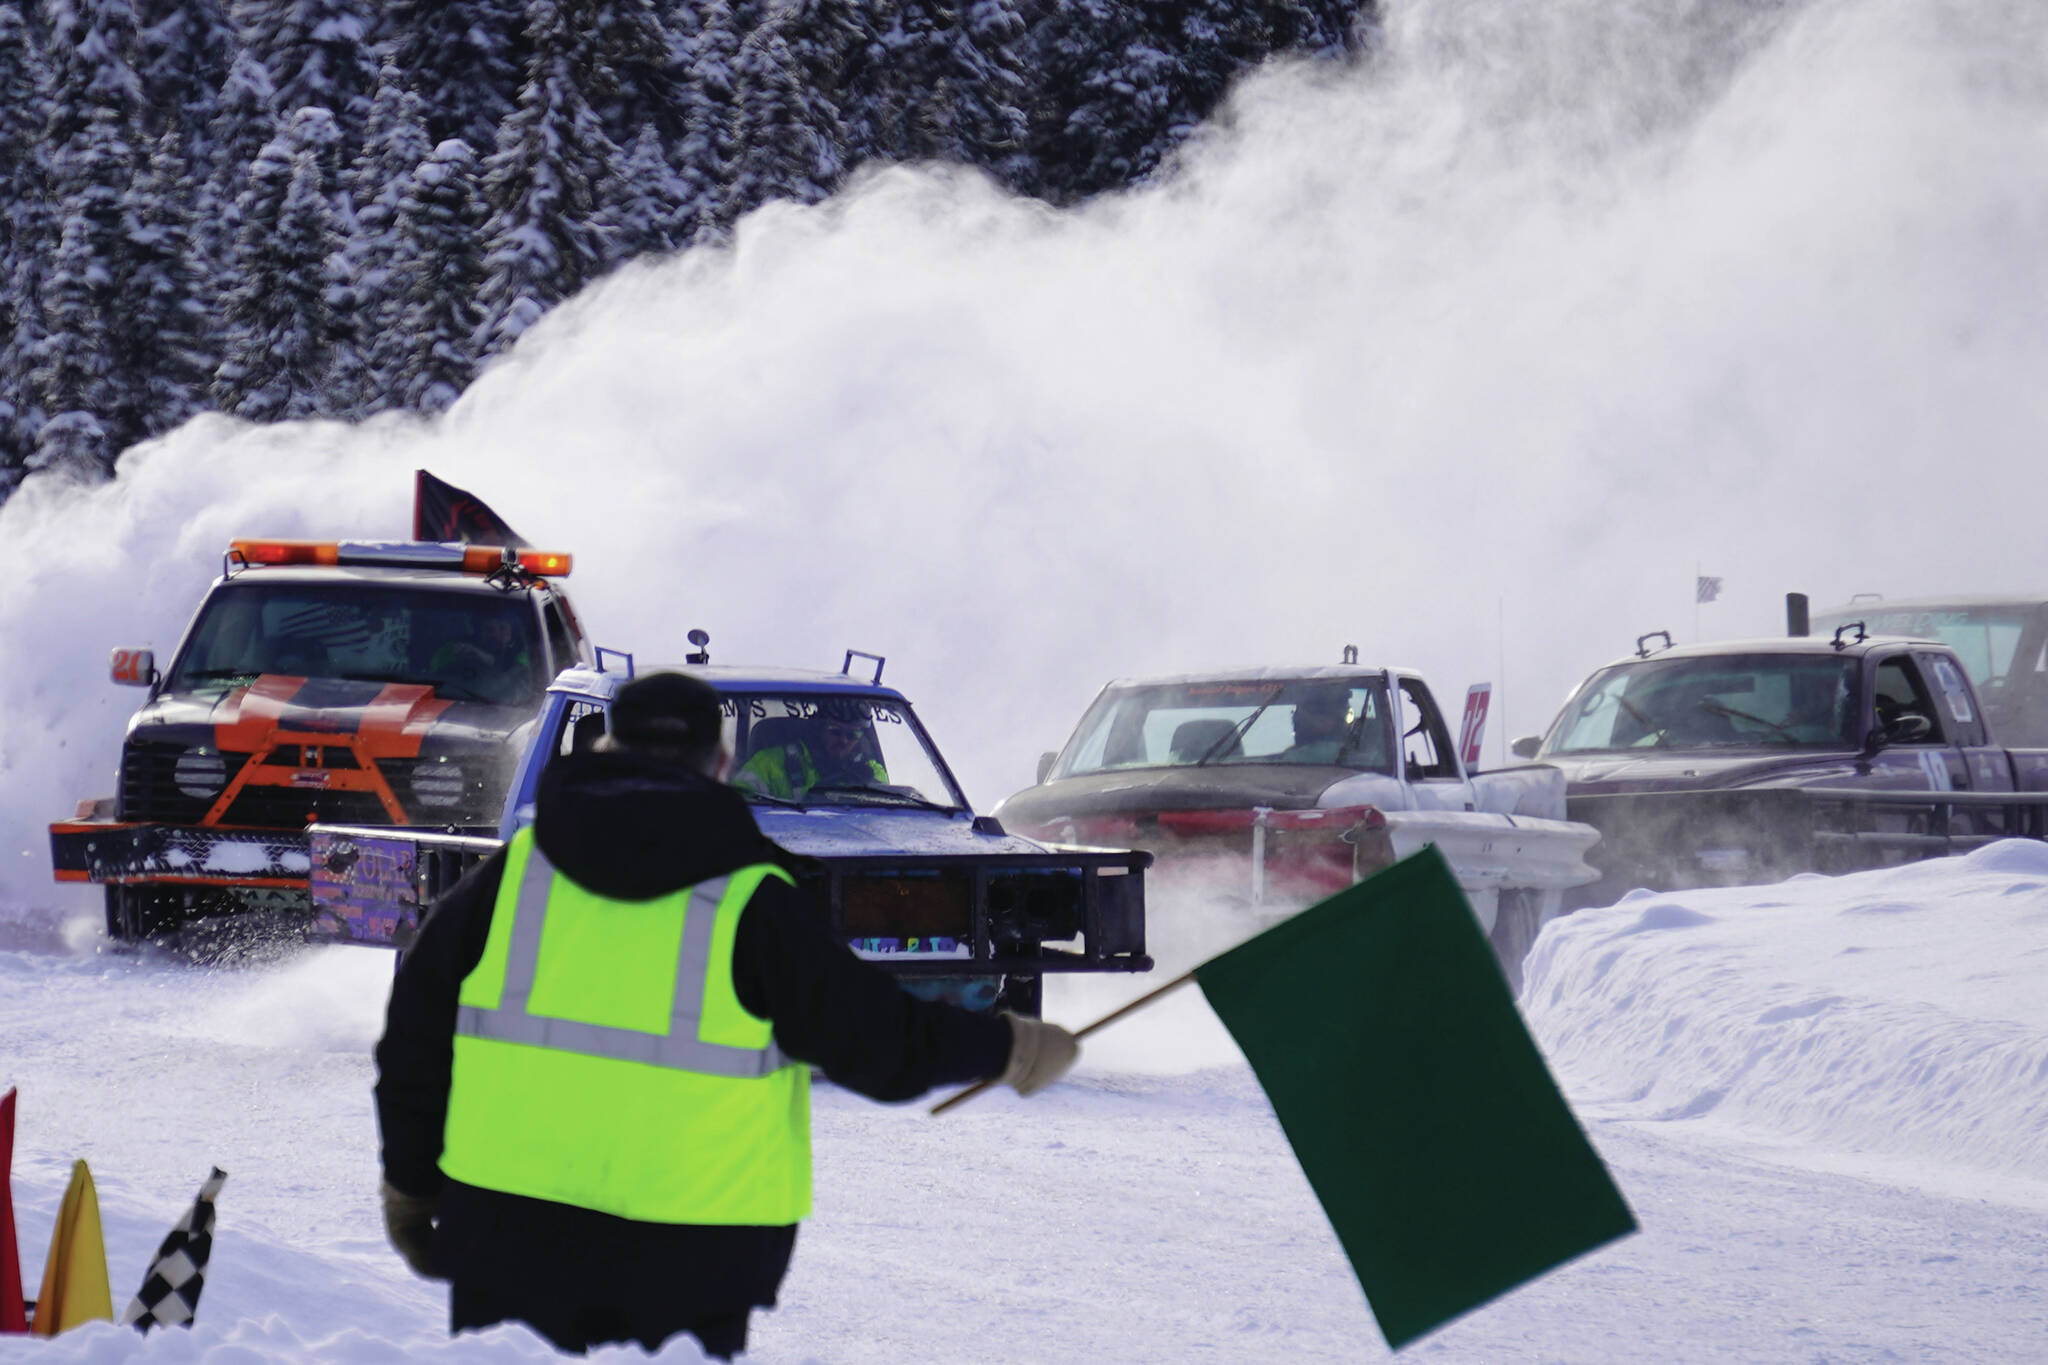 A tight pack of vehicles round the bend to complete a lap during Kenai Peninsula Ice Racing at the Decanter Inn in Kasilof on Sunday. (Jake Dye/Peninsula Clarion)